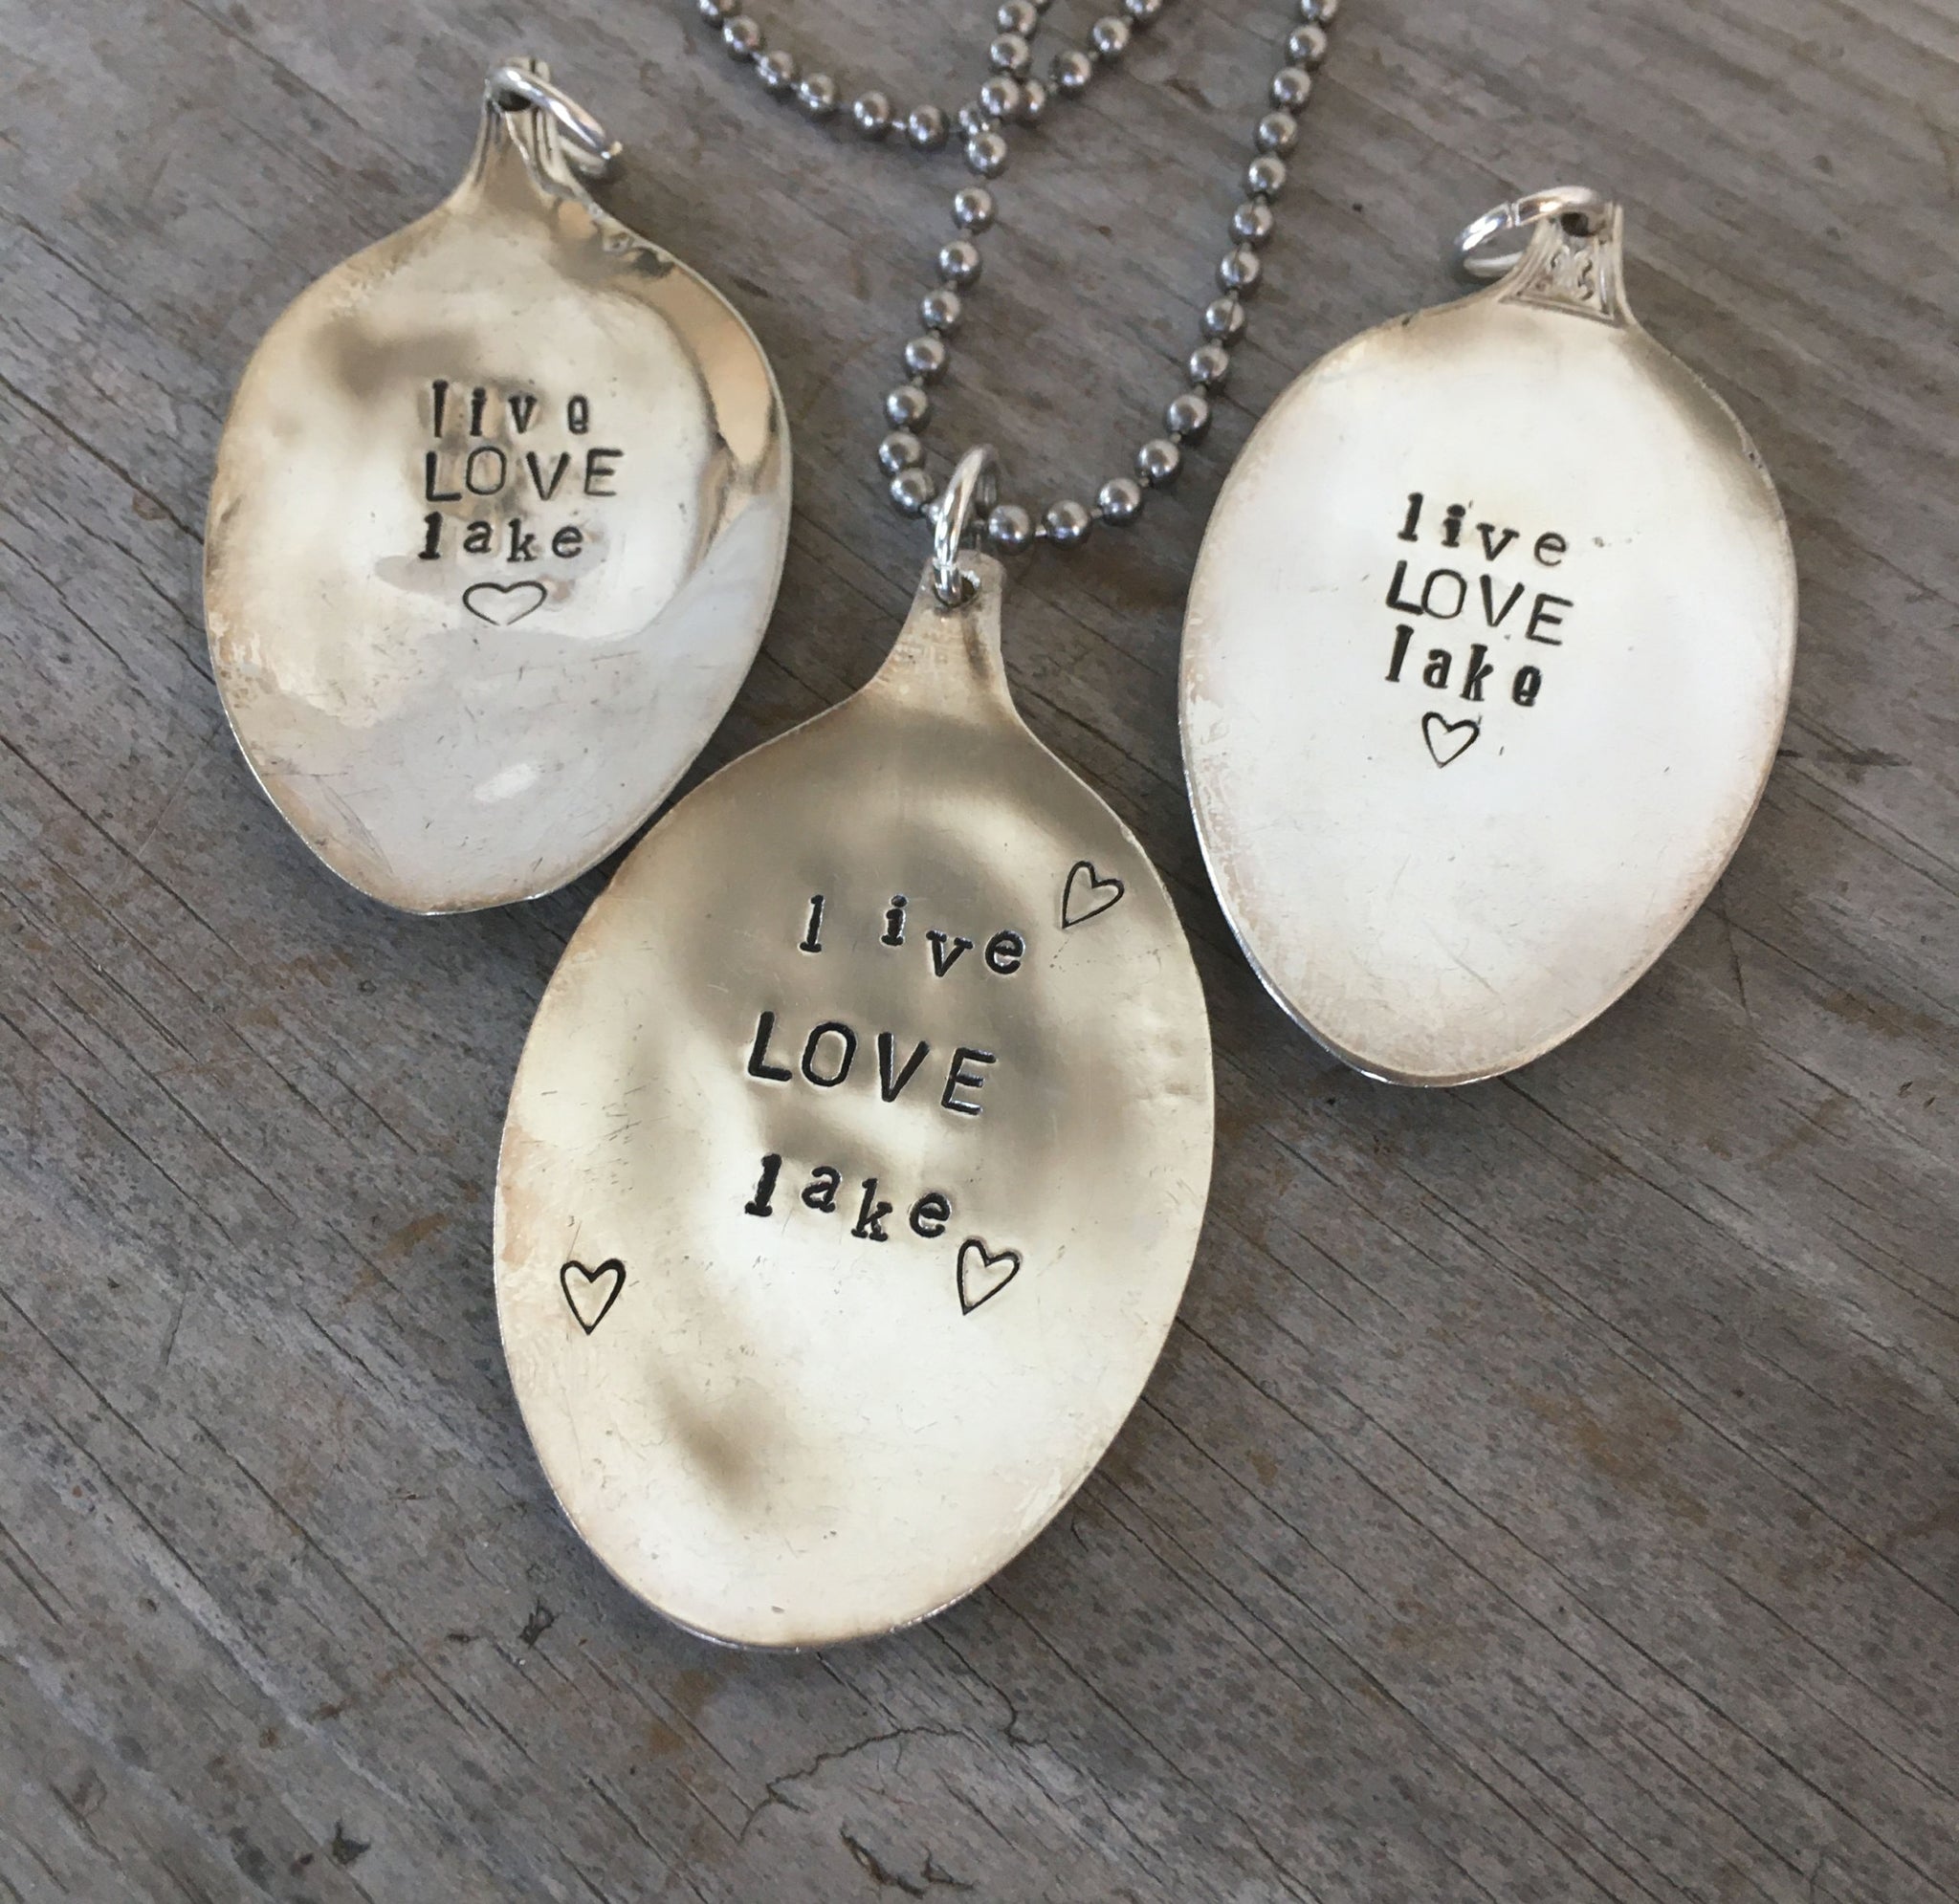 Spoon Hidden, Spoon Necklace - Stamped LOVE - Spoon Handle Jewelry -  Necklace - Vintage - Ball Chain - Silver Plated Necklace - Jewelry